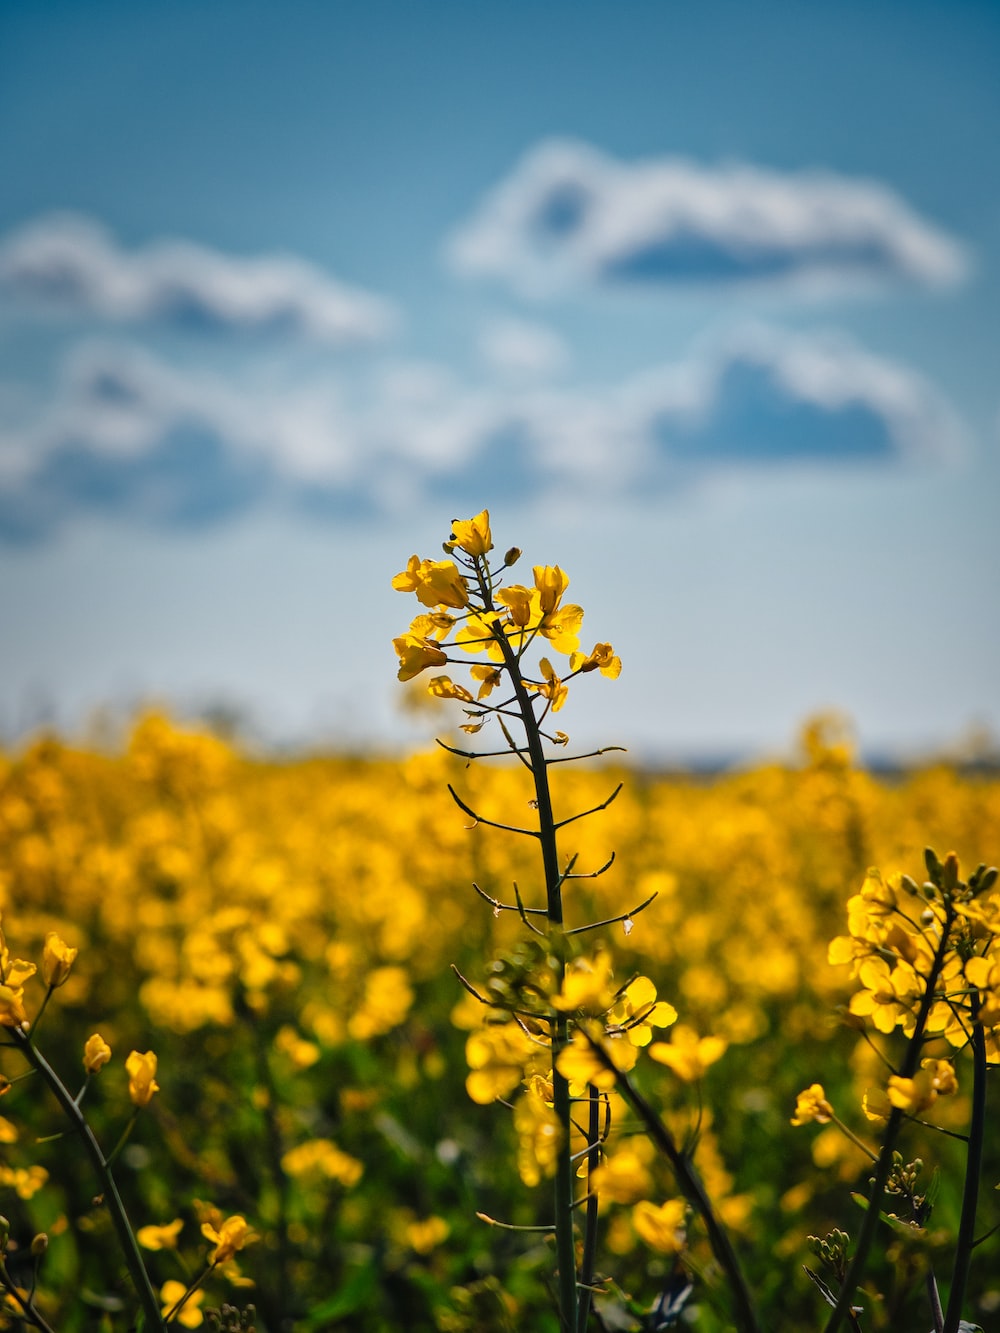 yellow flower field under blue sky and white clouds during daytime photo